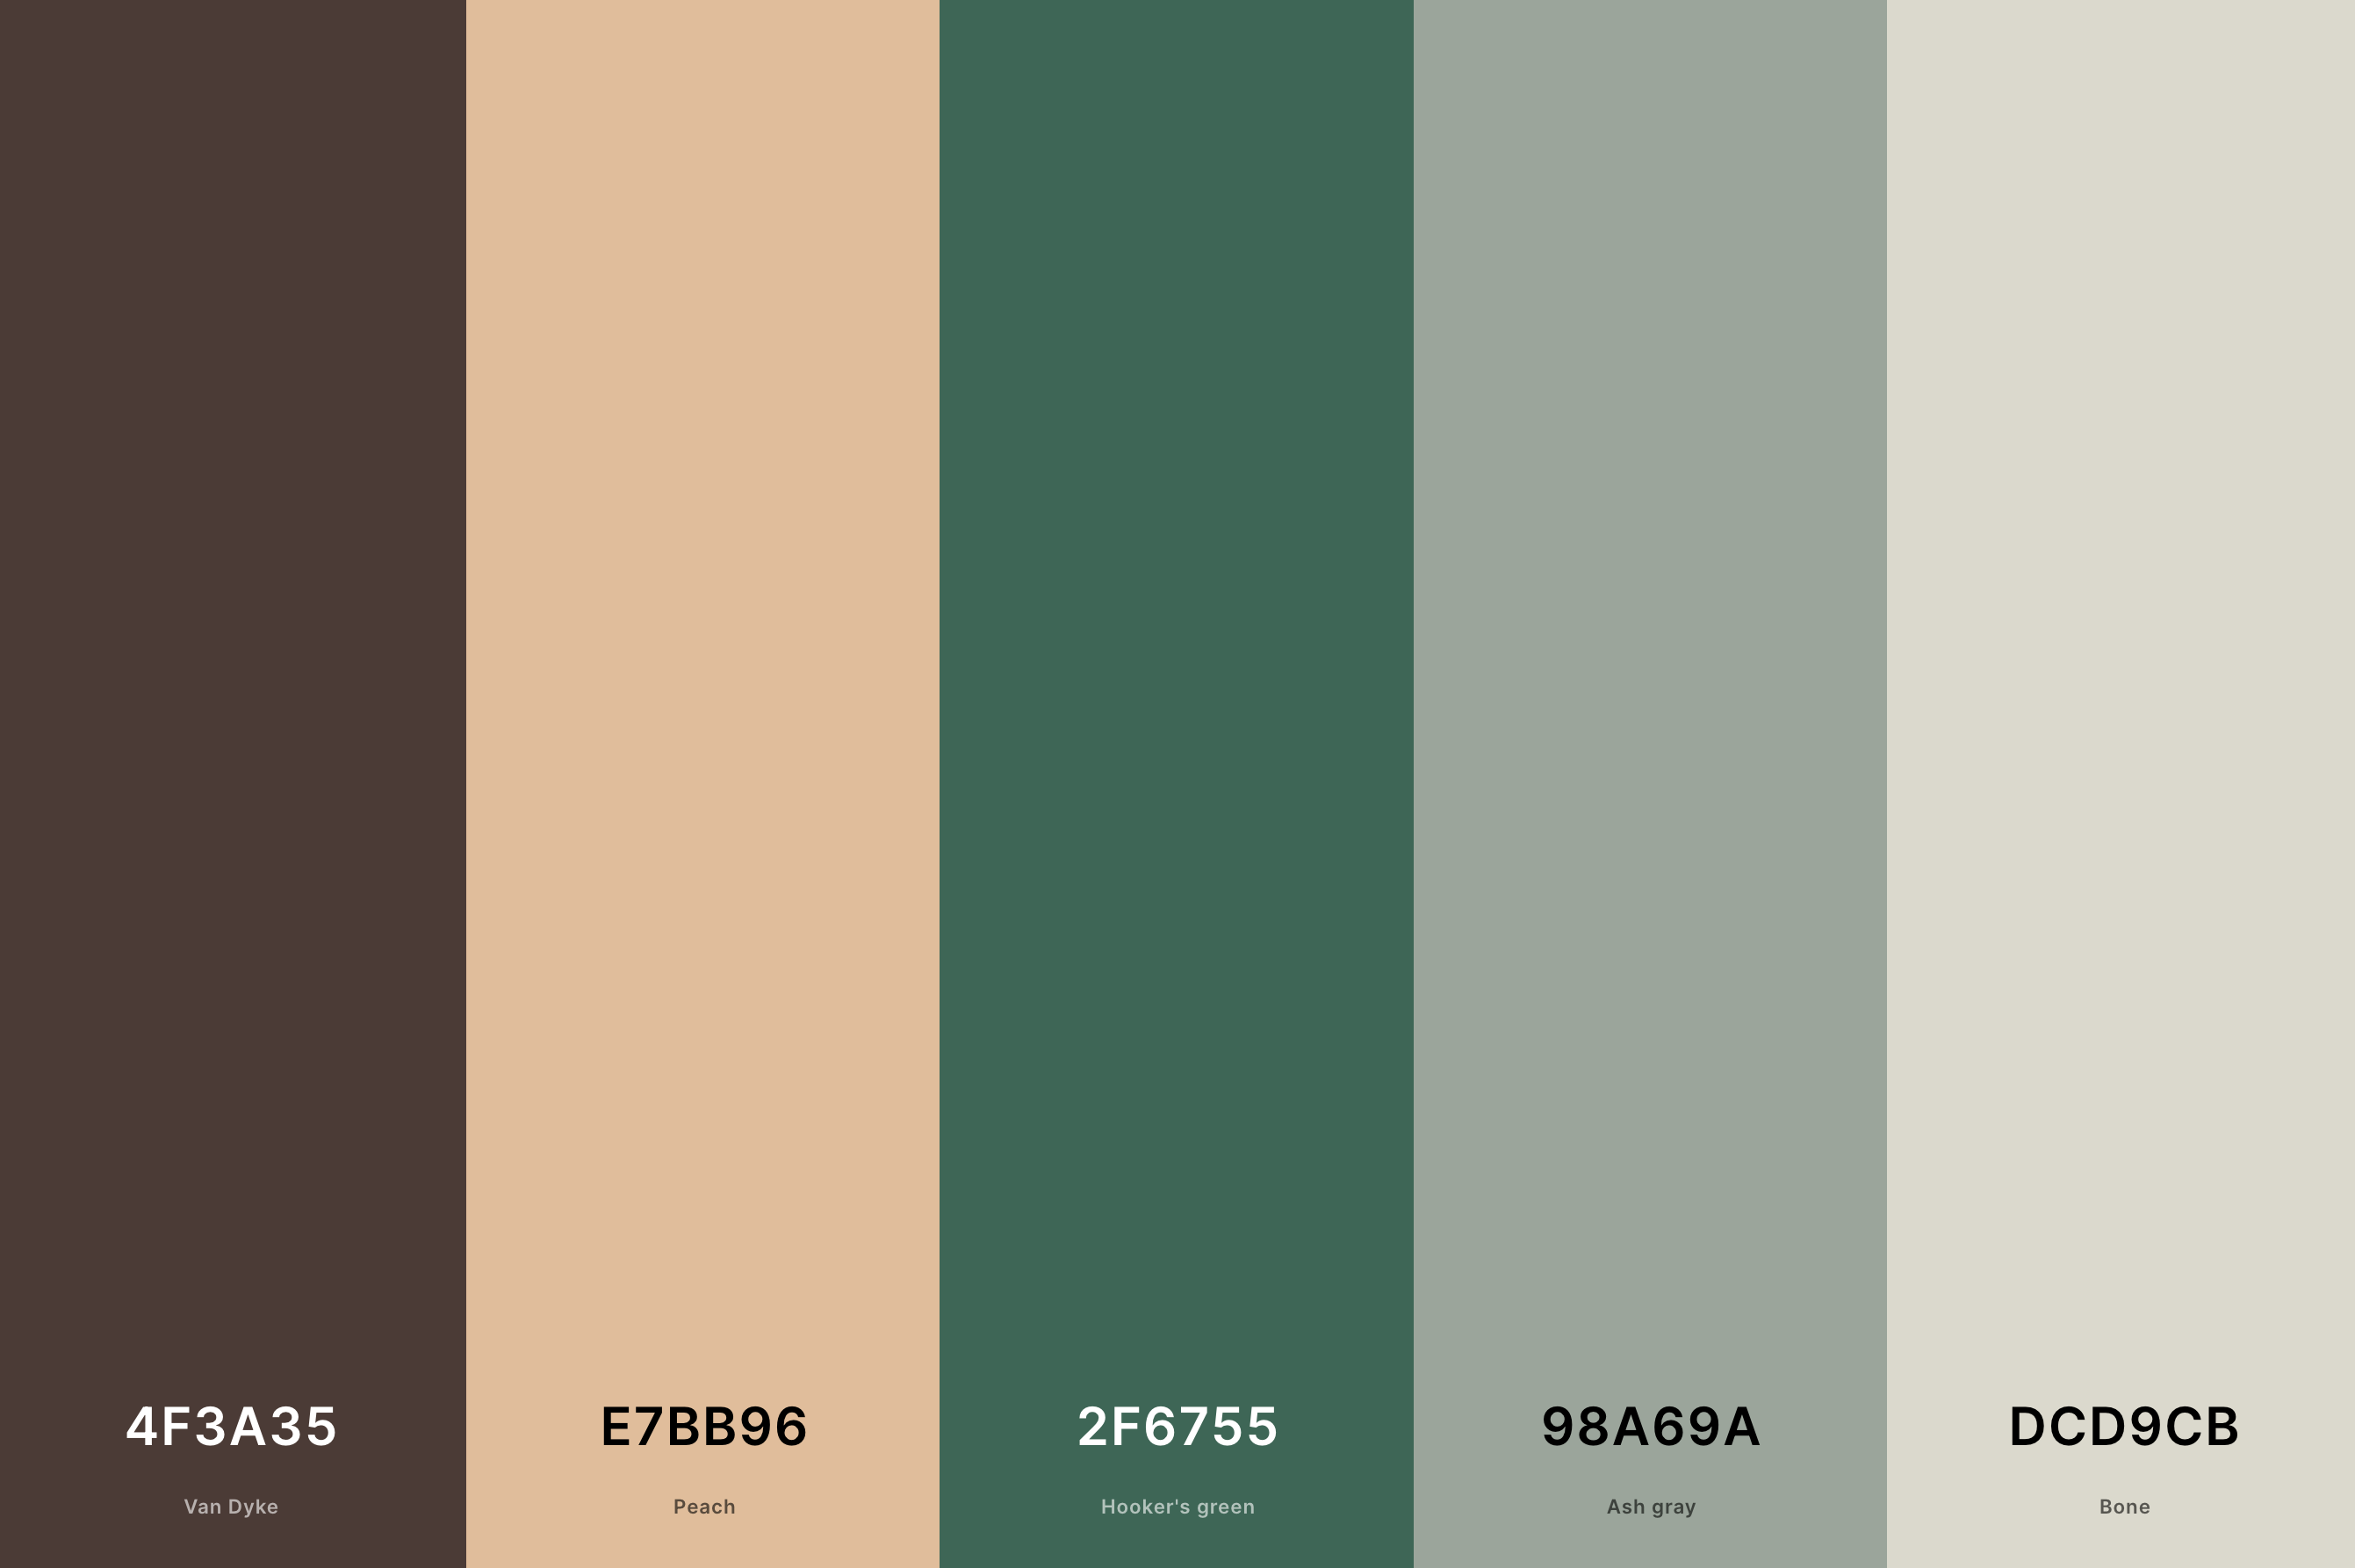 11. Aesthetic Vintage Color Palette Color Palette with Van Dyke (Hex #4F3A35) + Peach (Hex #E7BB96) + Hooker'S Green (Hex #2F6755) + Ash Gray (Hex #98A69A) + Bone (Hex #DCD9CB) Color Palette with Hex Codes